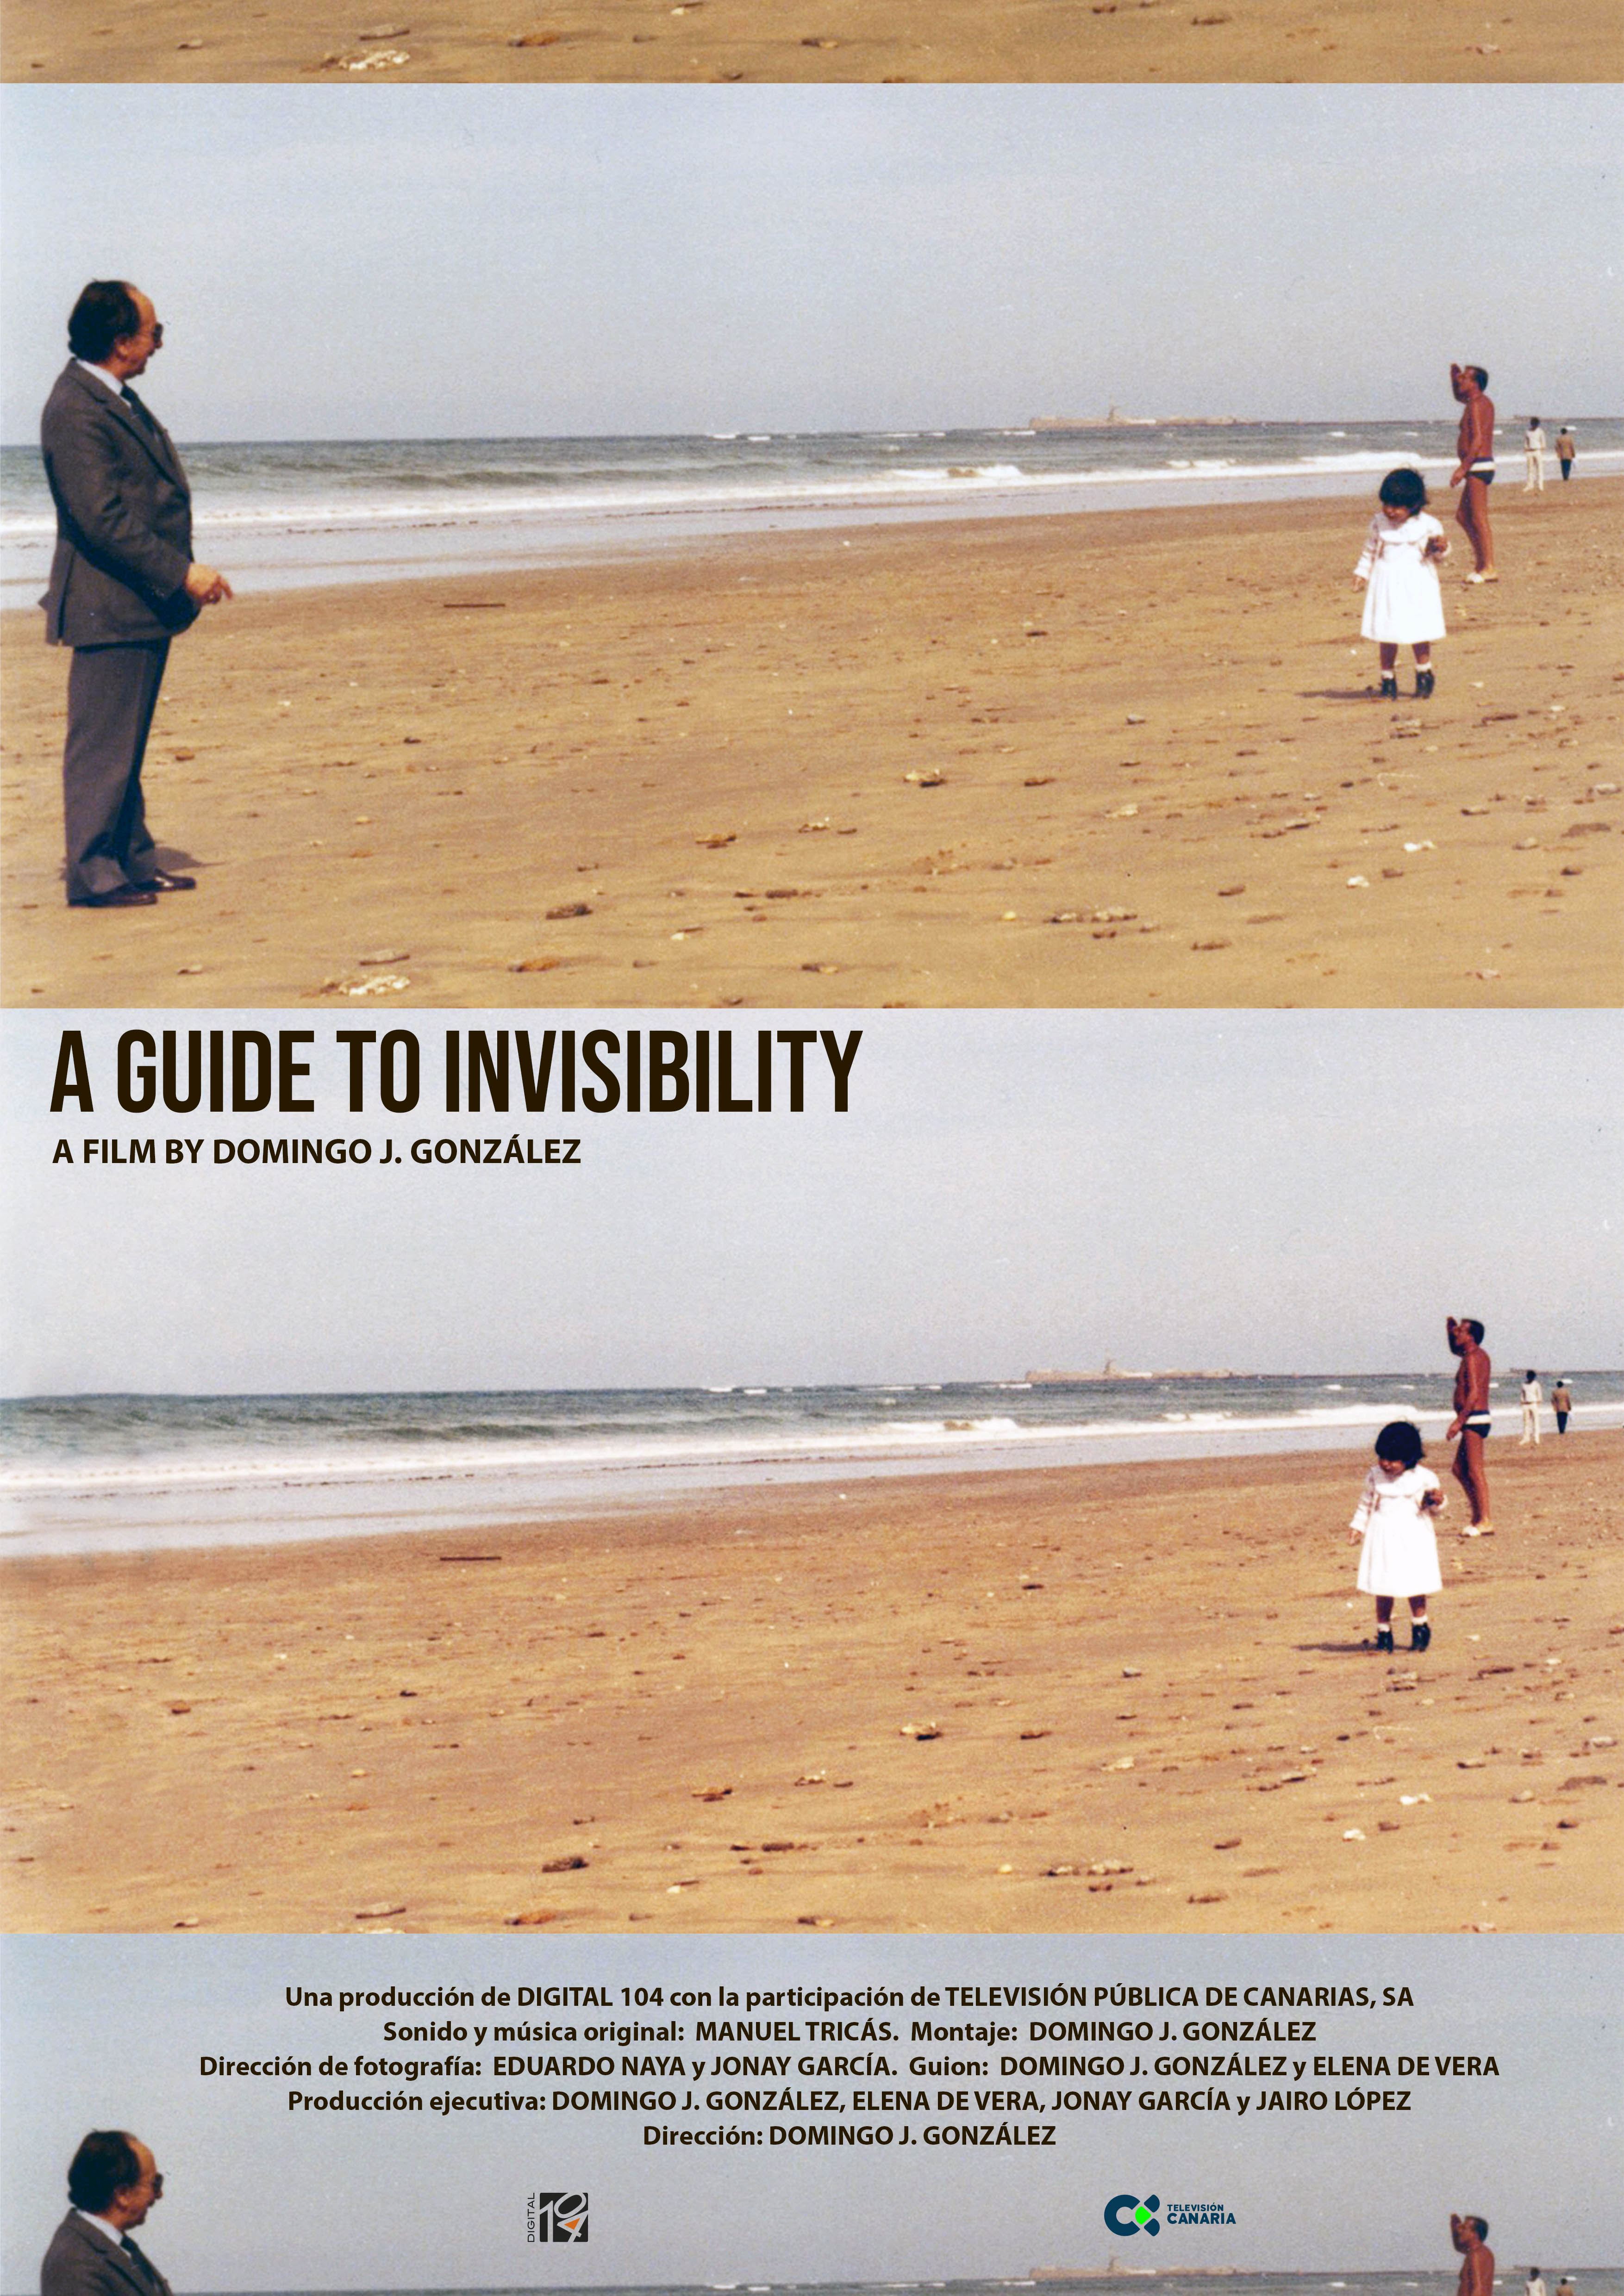 A GUIDE TO INVISIBILITY